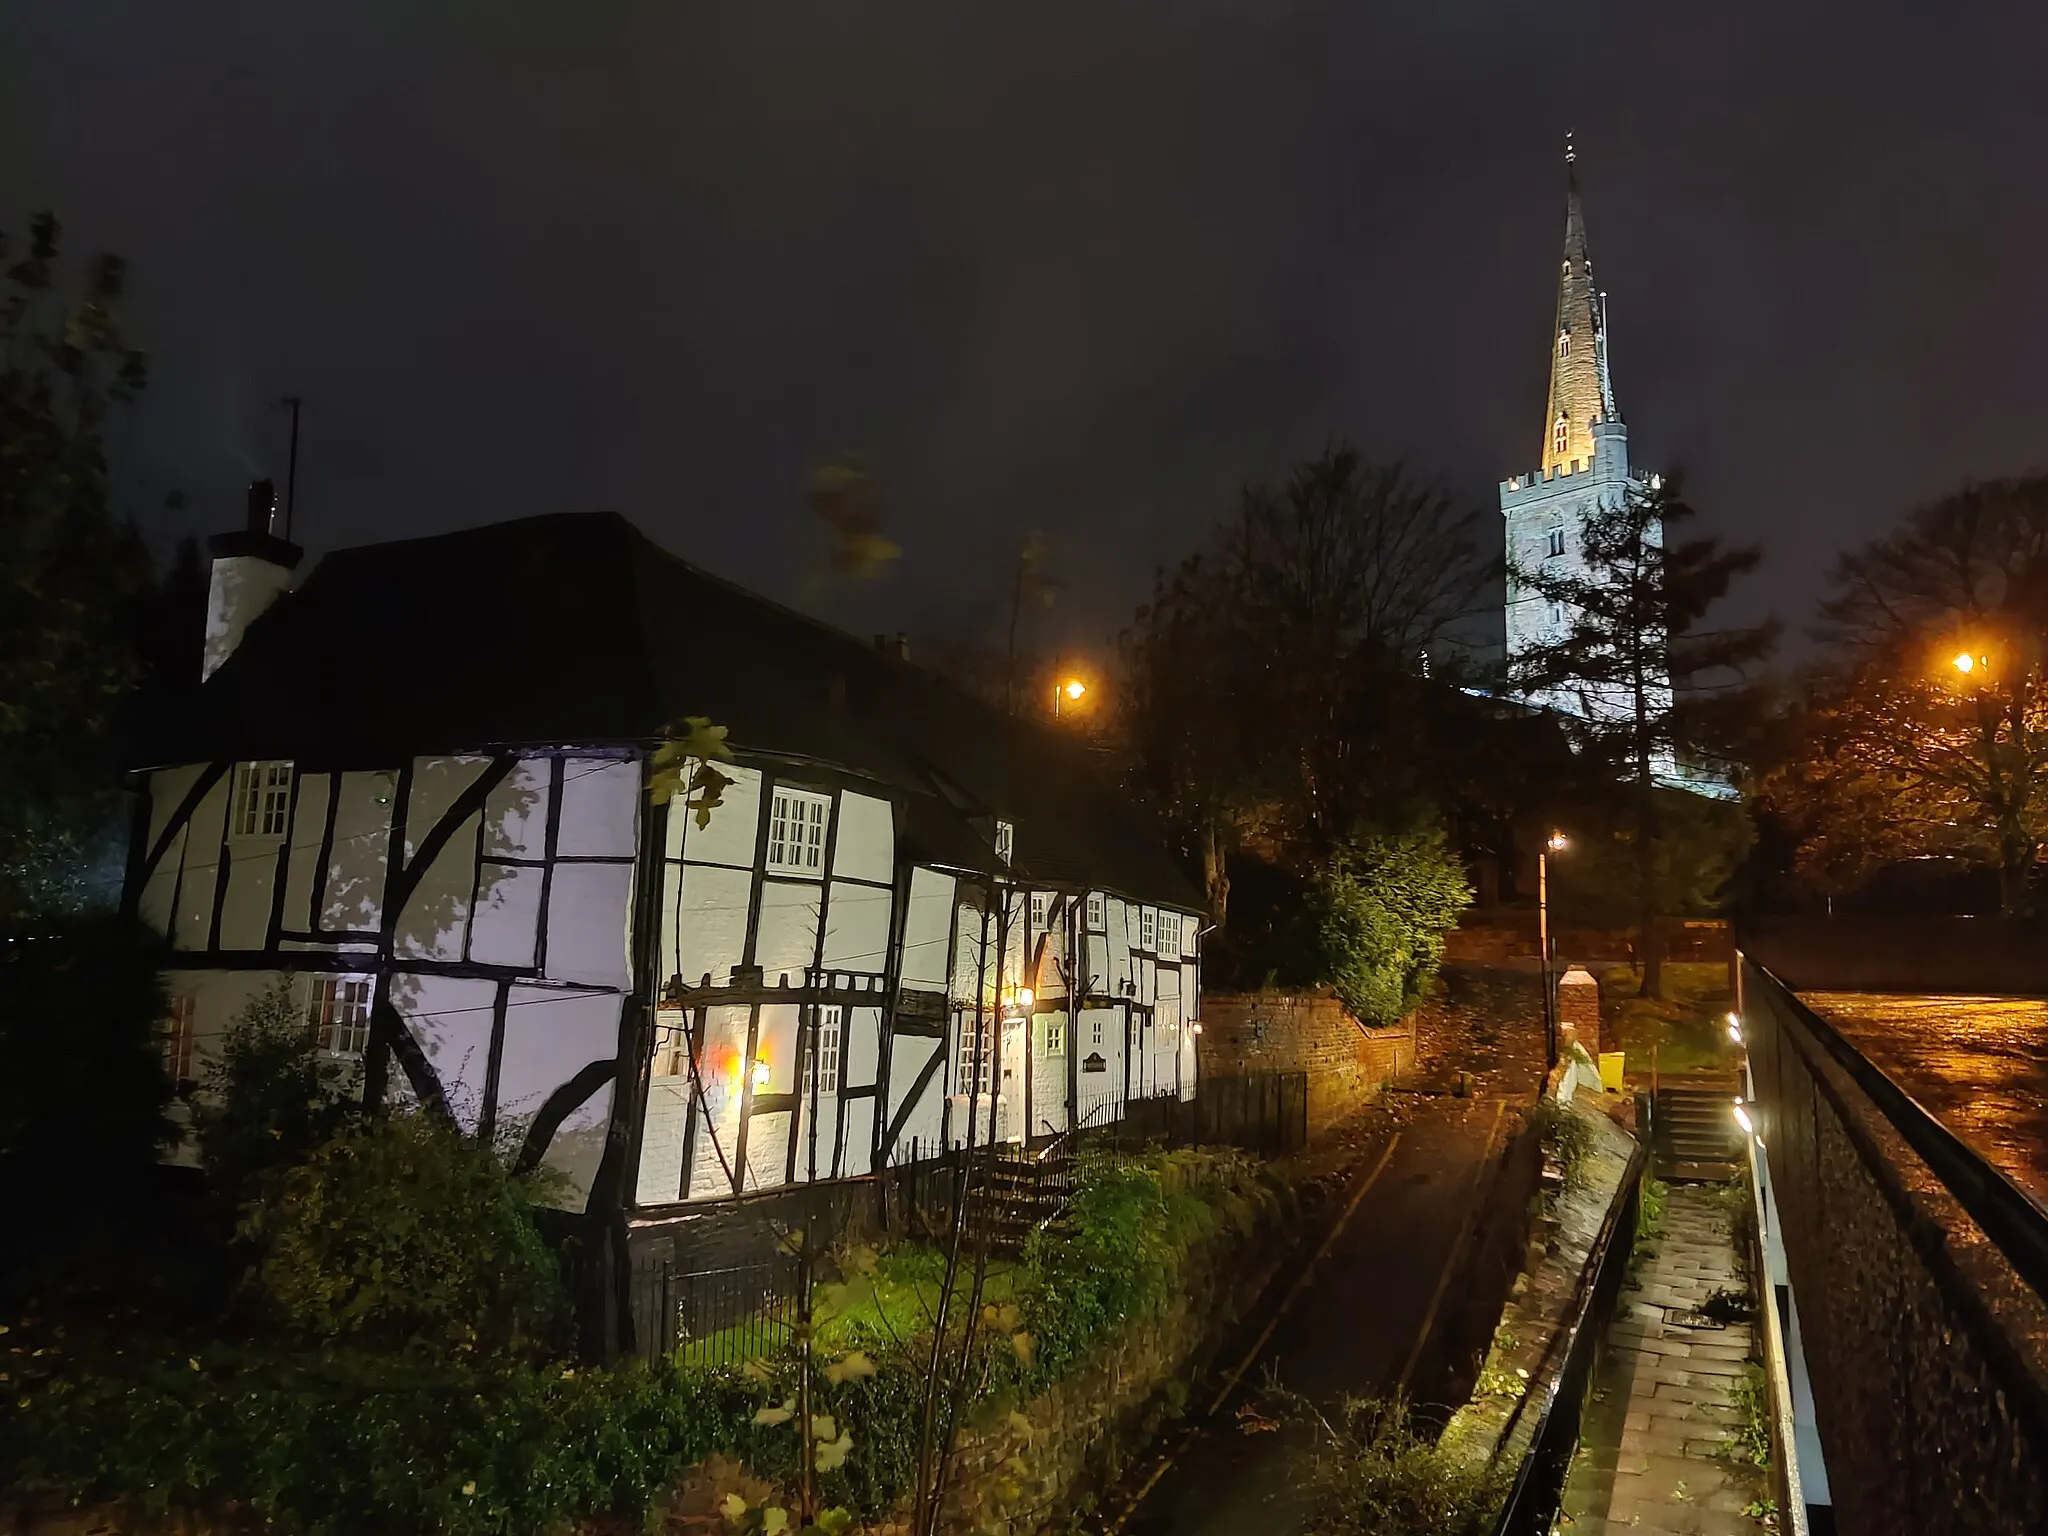 Photo showing: Whitefriars, Church Lane, Halesowen, England, at night with the parish church of St. John the Baptist in the background.